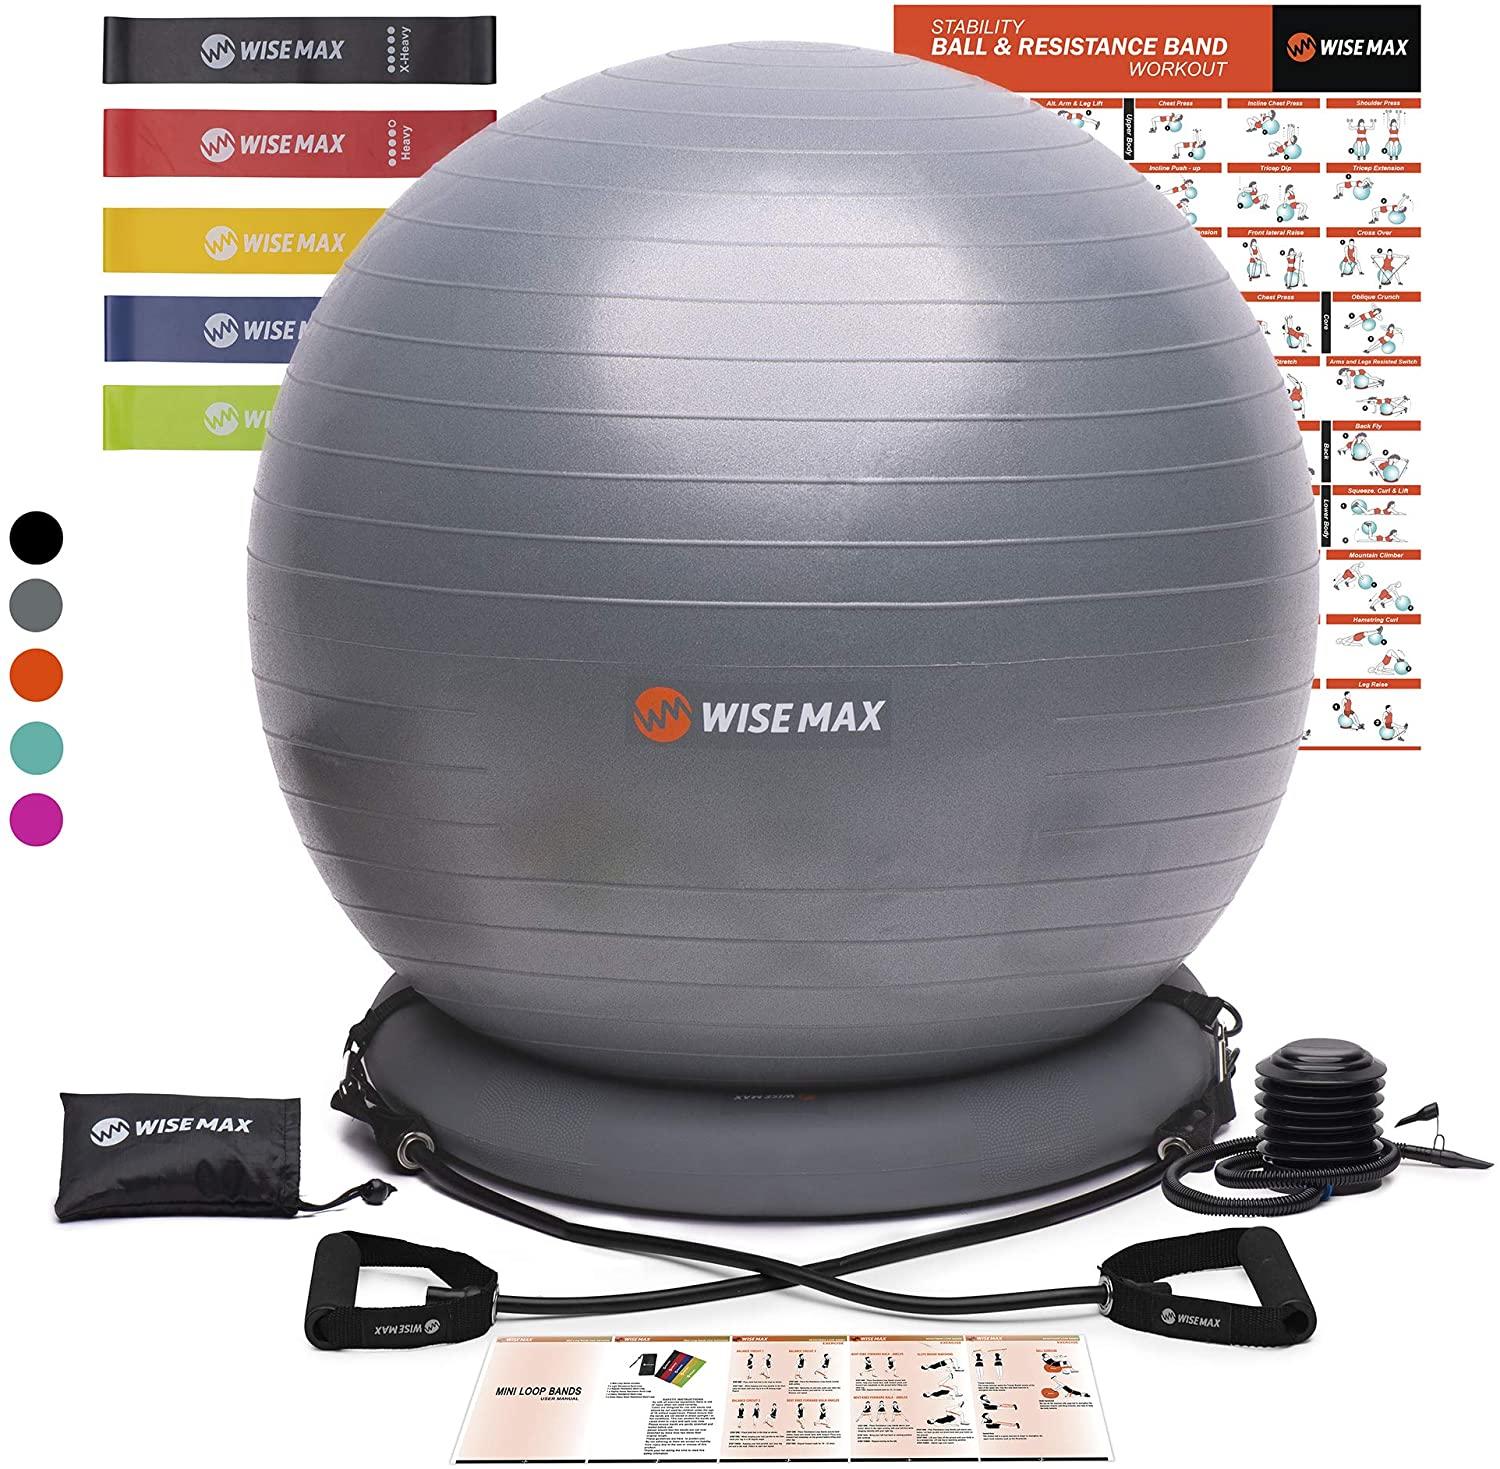 Sport Shiny Pro Balance Ball Chair Exercise Stability Yoga Ball with Slipcover 